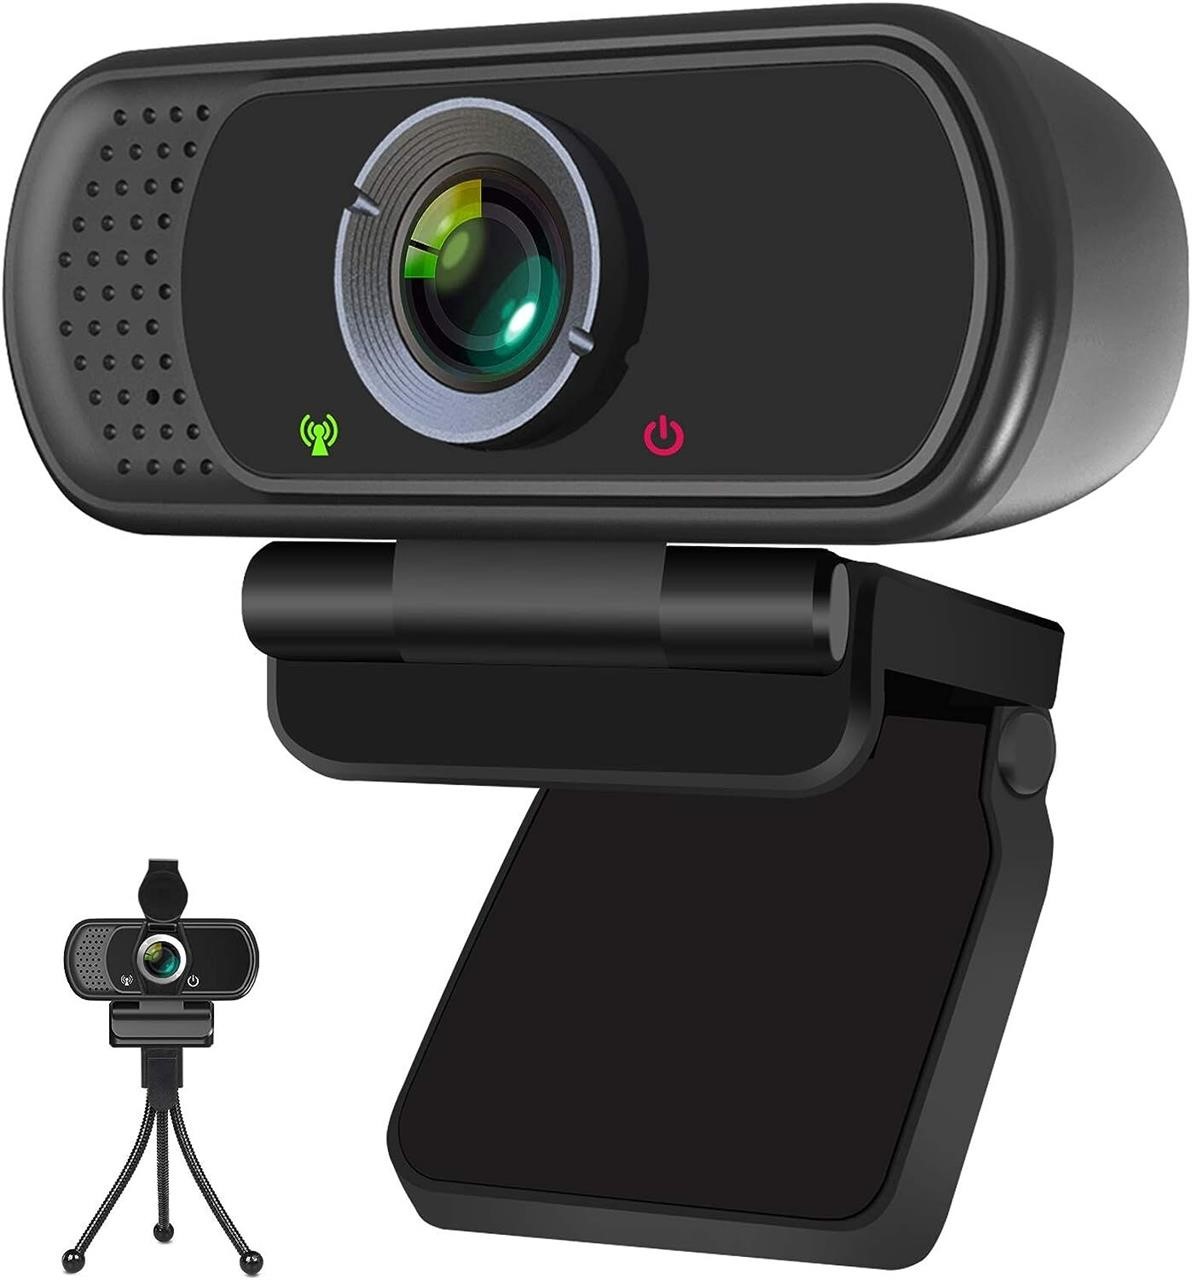 Full HD 1080P Webcam with Privacy Shutter